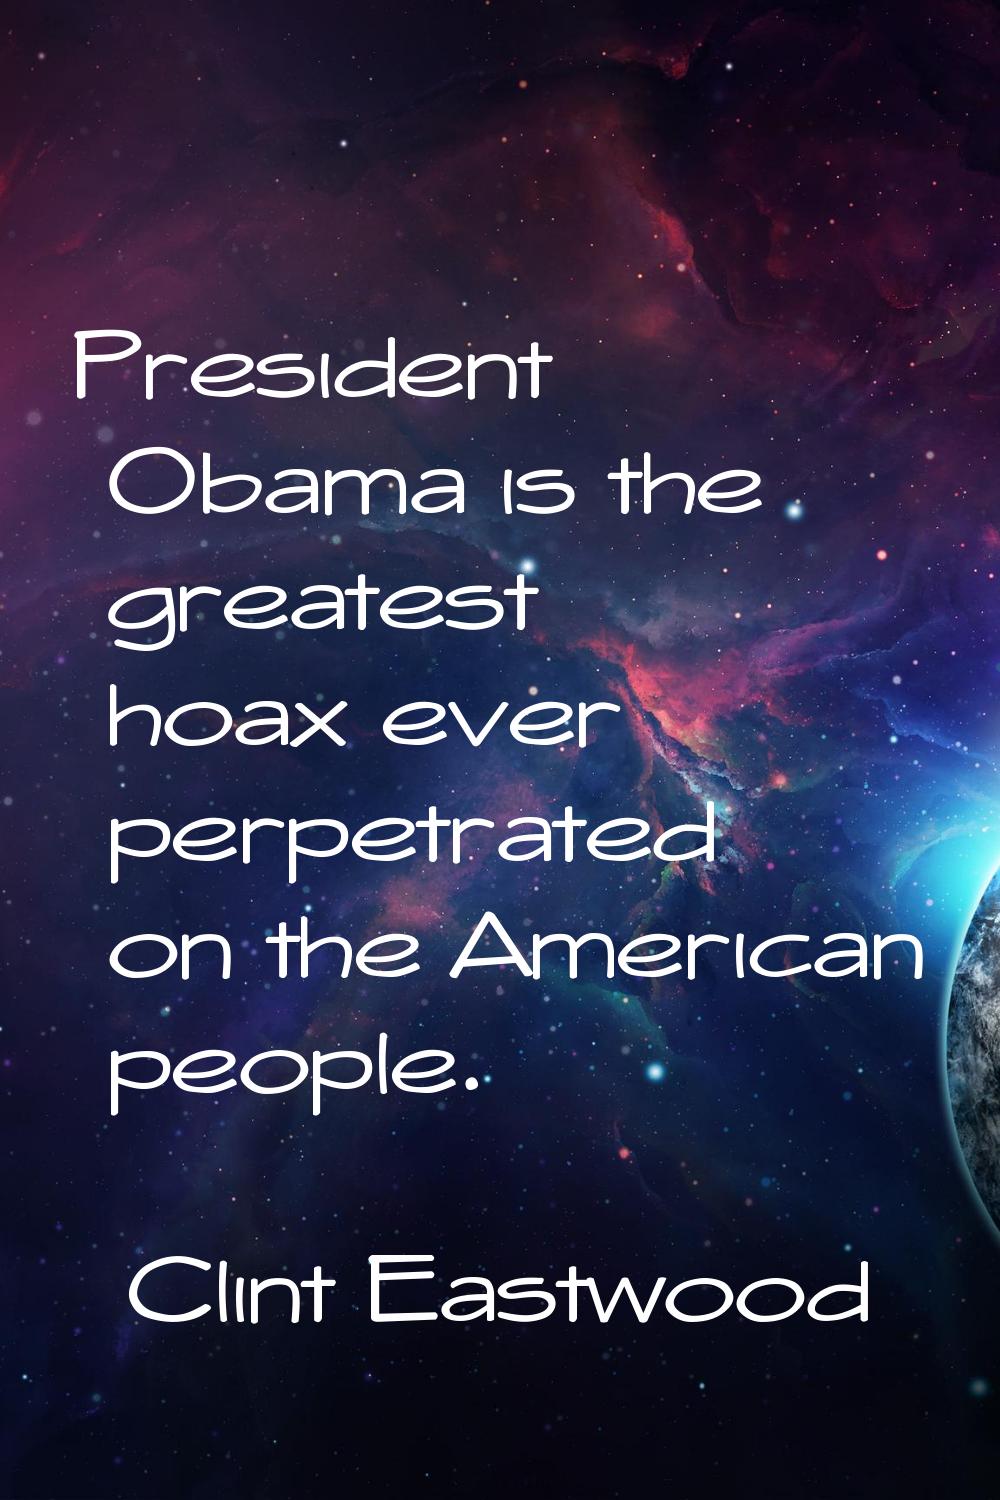 President Obama is the greatest hoax ever perpetrated on the American people.